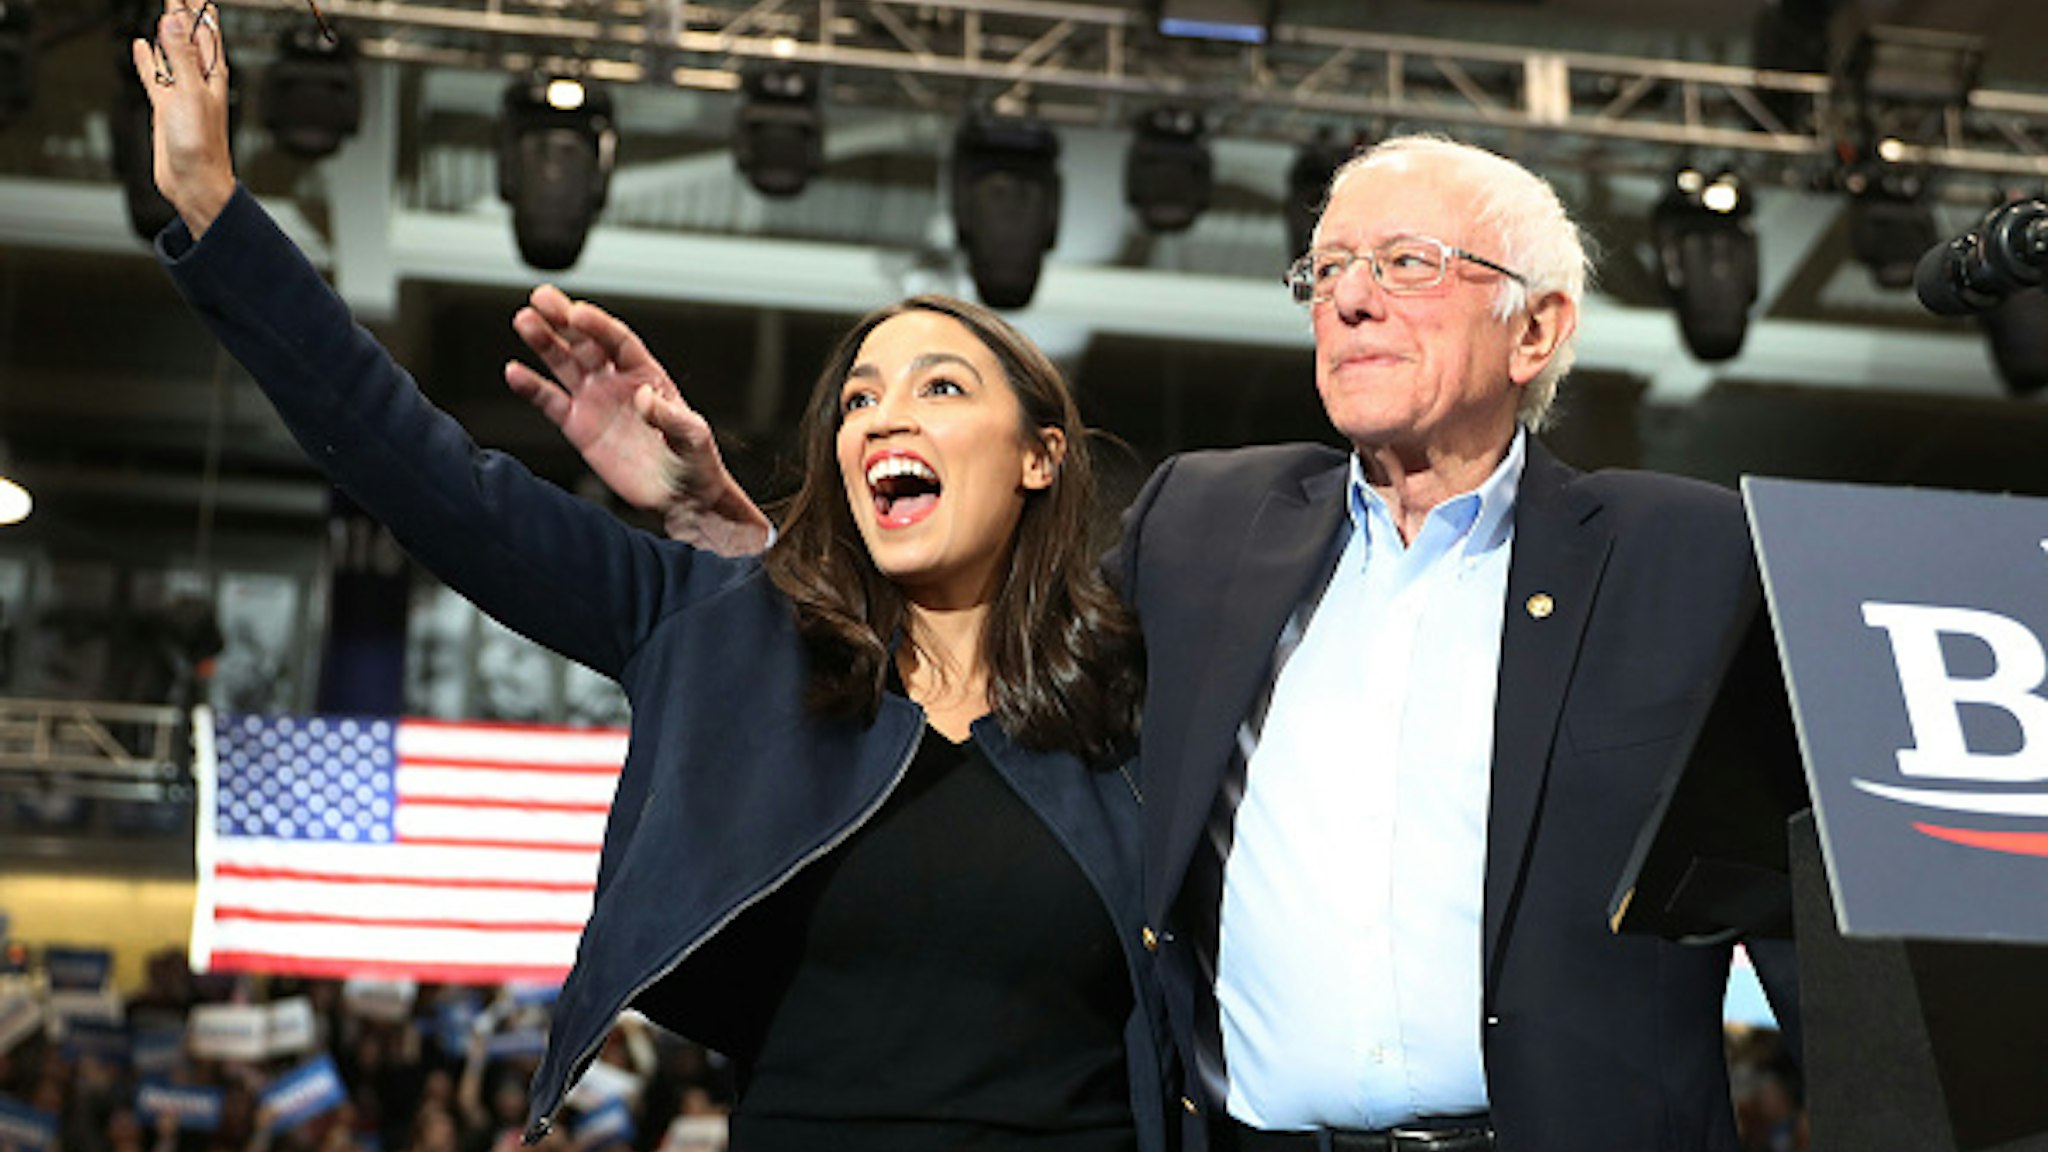 DURHAM, NEW HAMPSHIRE - FEBRUARY 10: U.S. Rep. Alexandria Ocasio-Cortez (D-N.Y) and Democratic presidential candidate Sen. Bernie Sanders (I-VT) stand together during his campaign event at the Whittemore Center Arena on February 10, 2020 in Durham, New Hampshire. The state's Democratic primary is tomorrow.